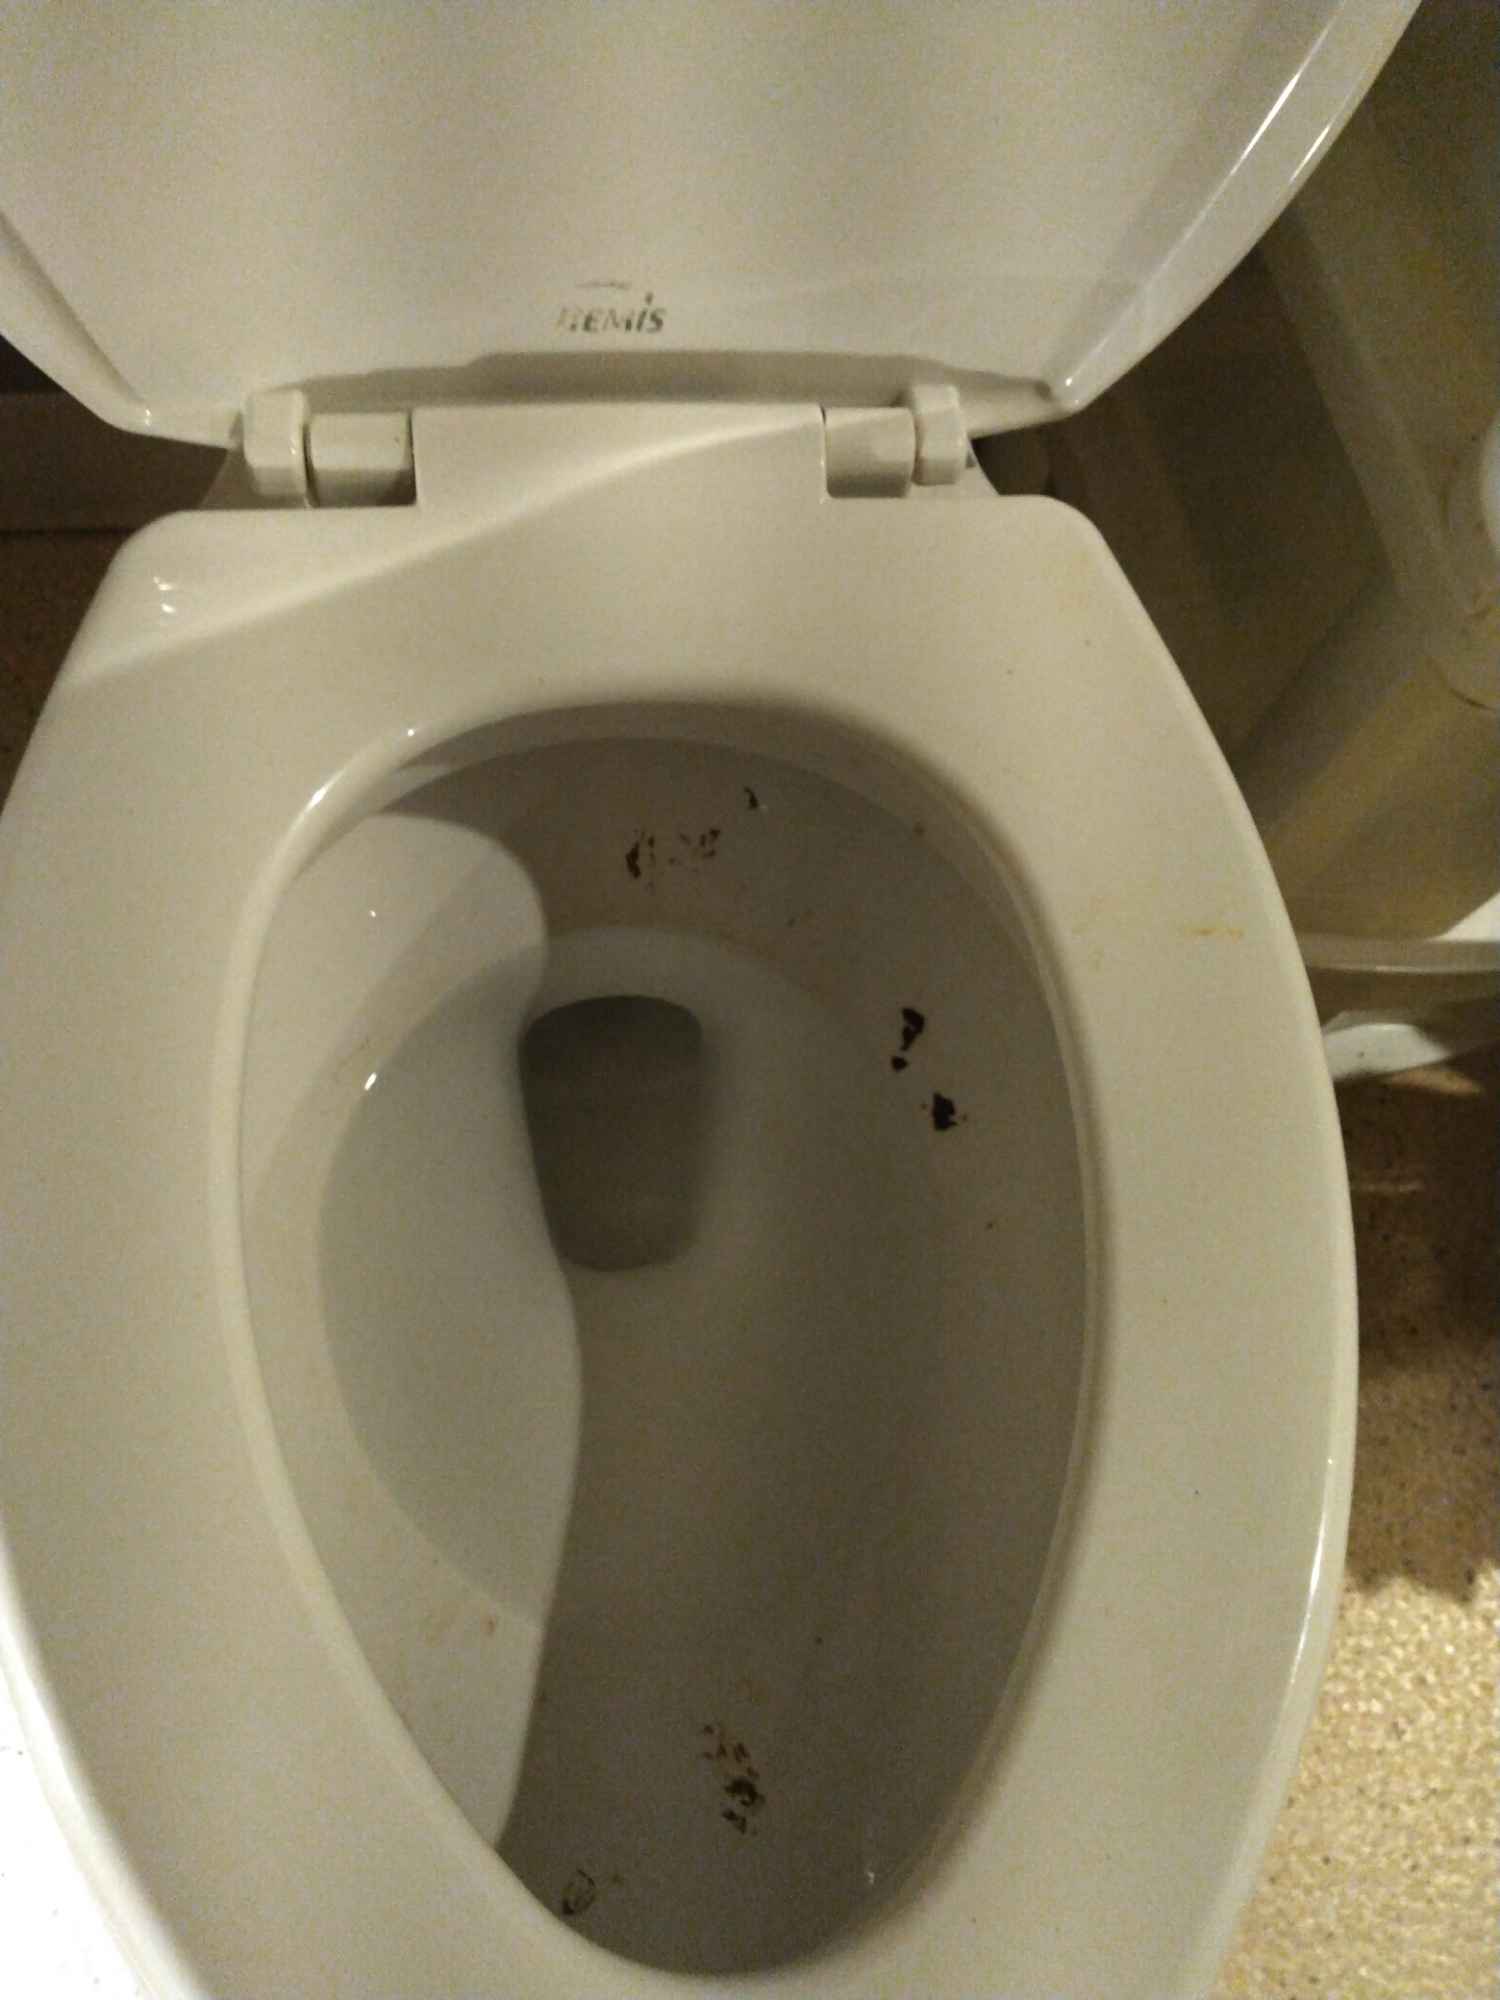 Filthy Toilet in $8,000 Janitor Closet Room,